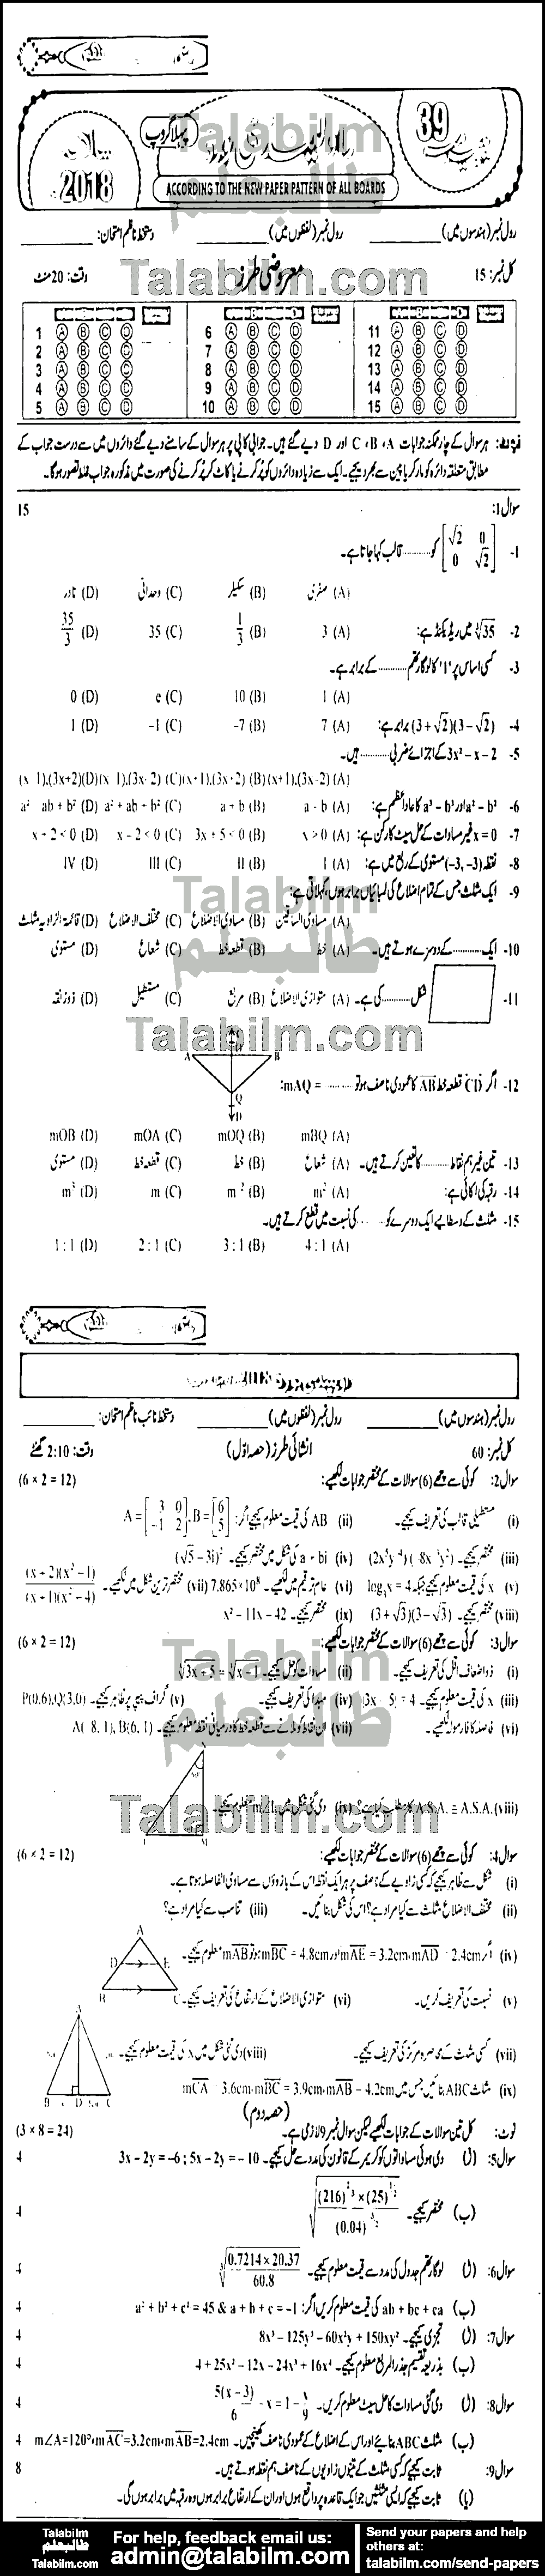 Math 0 past paper for 2018 Group-I